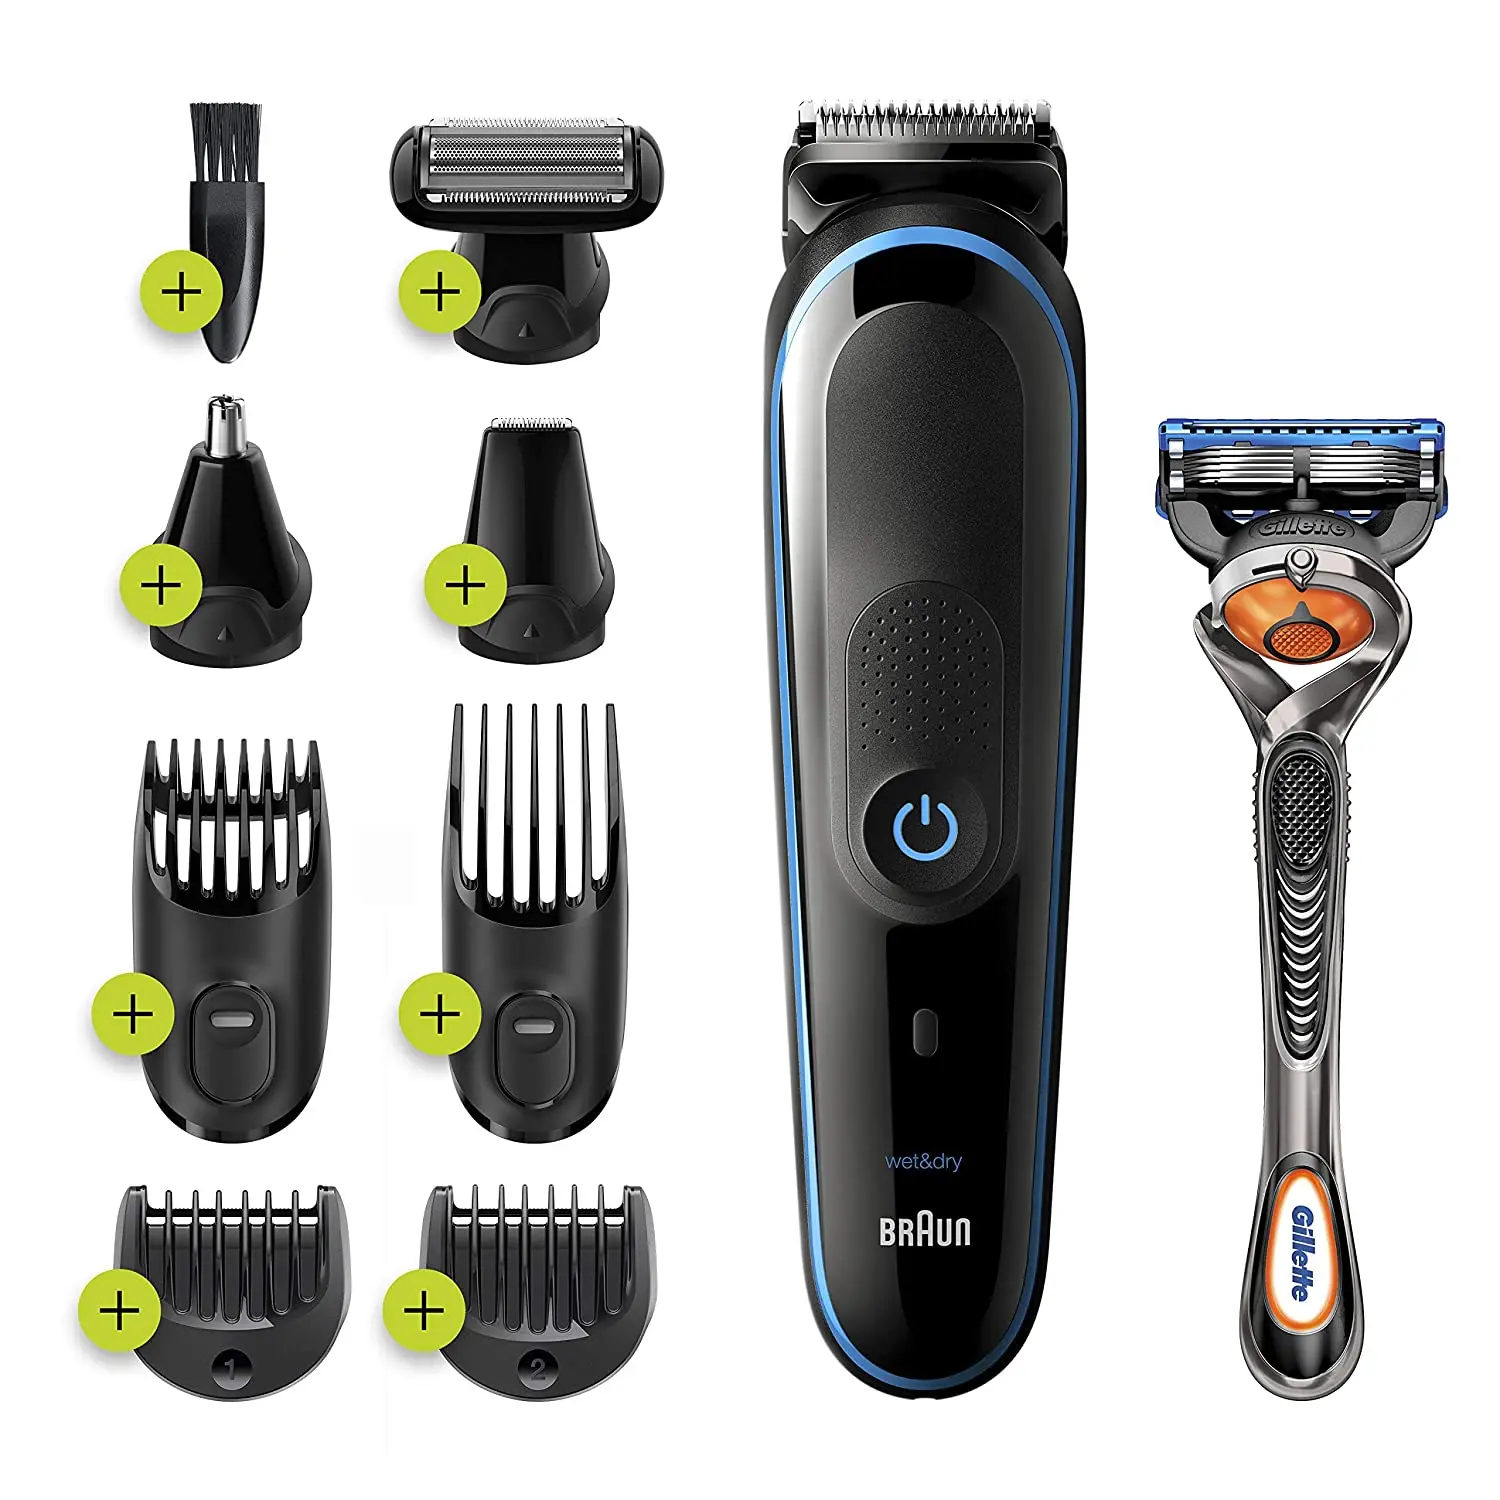 Braun Hair Clippers for Men 9-in-1 Beard, Ear and Nose Trimmer, Mens Grooming Kit, Body Groomer, Cordless & Rechargeable with ..